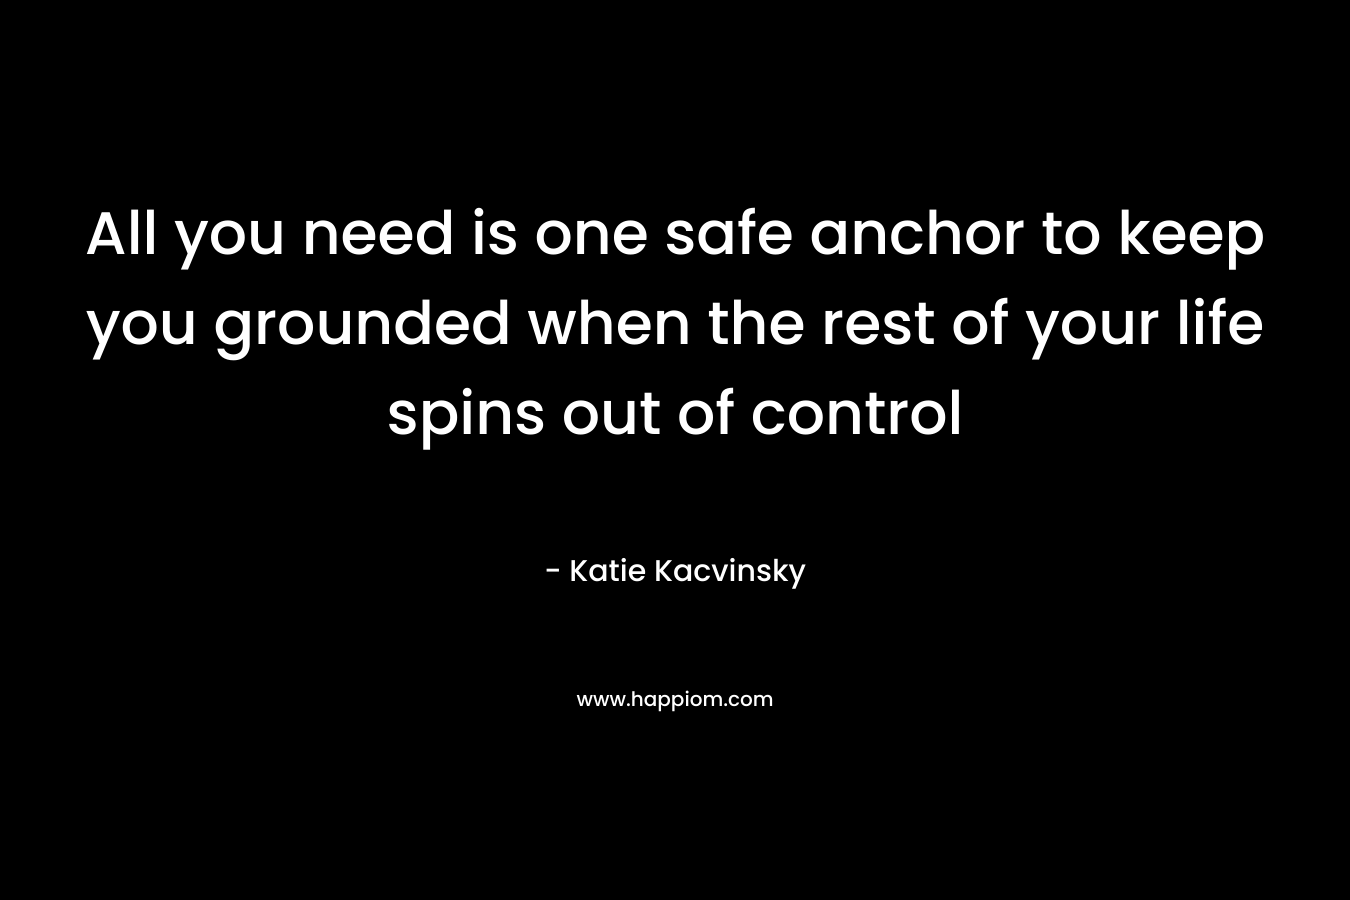 All you need is one safe anchor to keep you grounded when the rest of your life spins out of control – Katie Kacvinsky